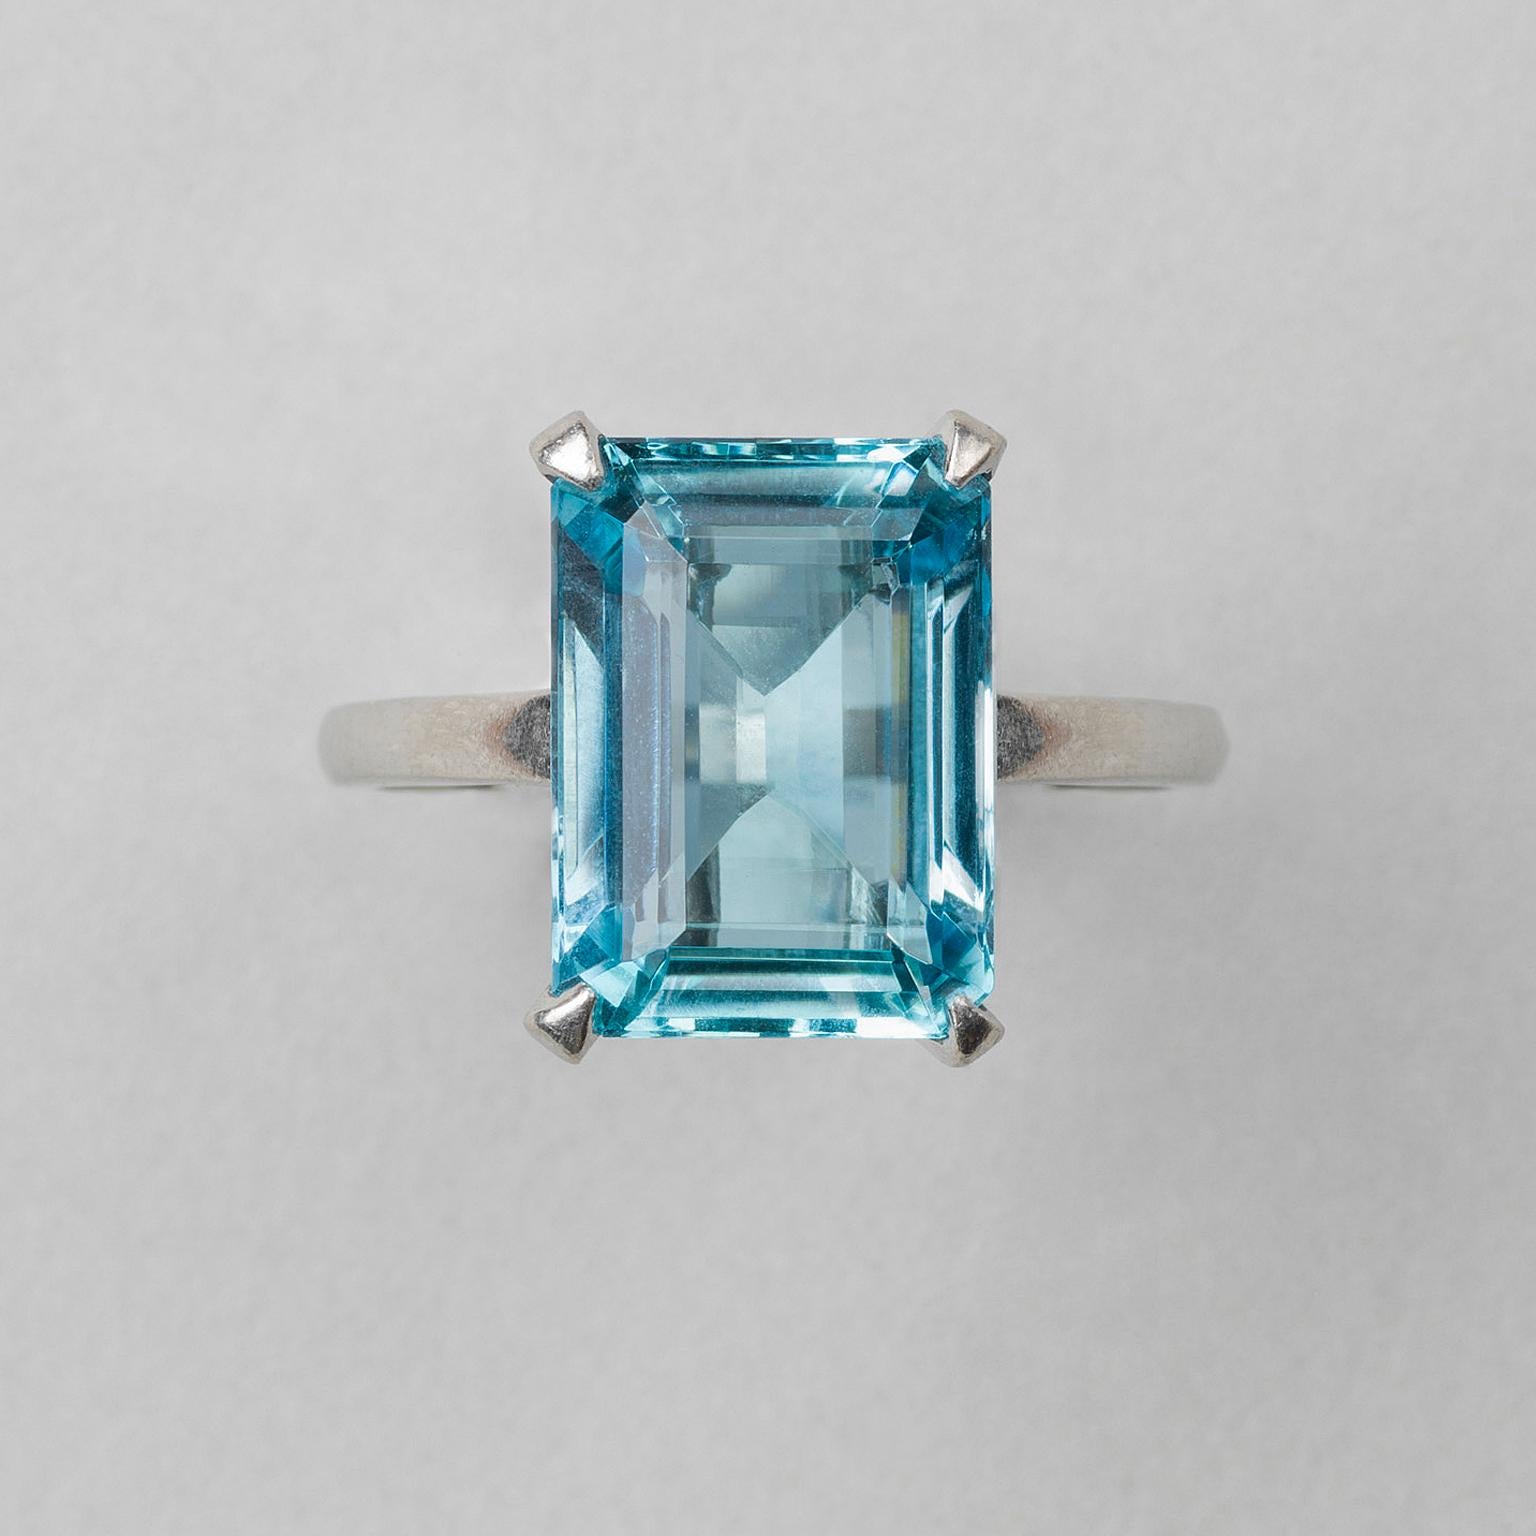 A platinum solitaire ring set with a large step cut aquamarine (app. 8.50 carat) set in a raised prong setting, signed: Cartier, US circa 1950-60.

weight: 9.23 grams
ring size: 16.75 mm / 6 ¼ US
width: 16.17 – 2.10 mm